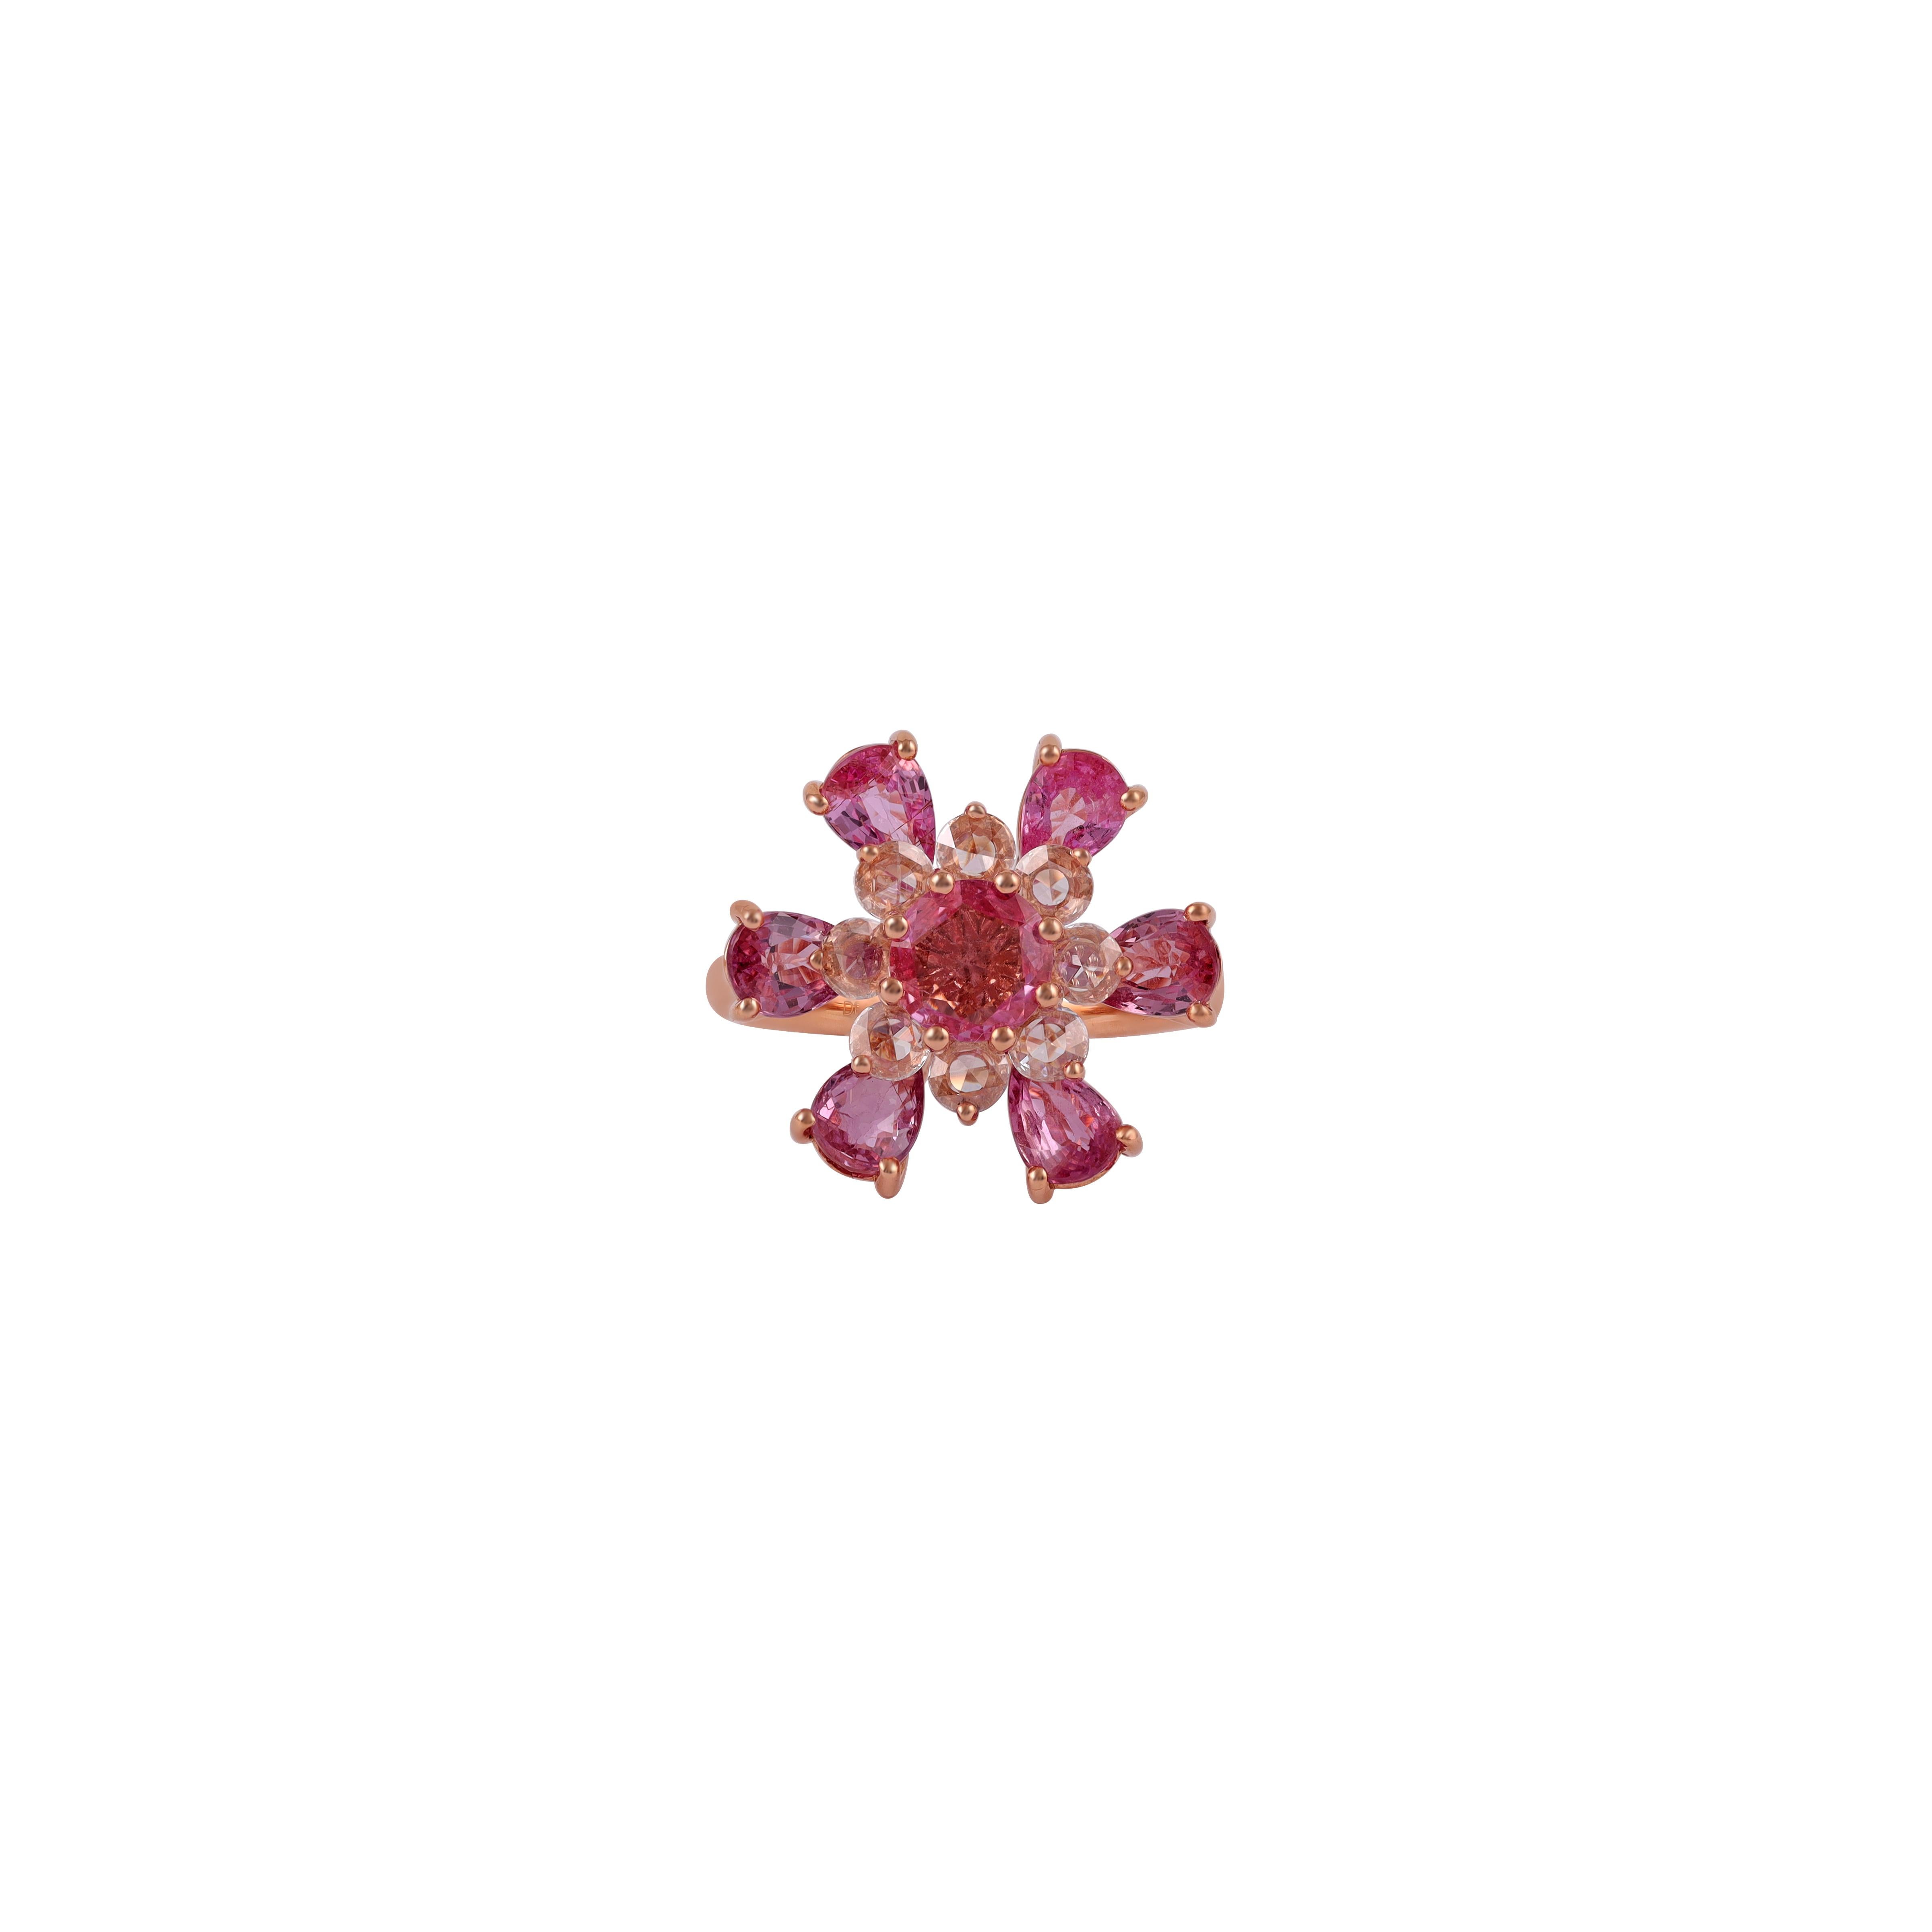 An exclusive 1 Round Pink Sapphire surrounded by 6 Pear shape Sapphire in 18 karat rose gold.
7 Pink Sapphire 3.50 CTS
8 Brilliant round cut Diamonds 0.41 CTS
18 k Rose gold mounting 5.42 GMS

Custom Services
Resizing is available.
Request